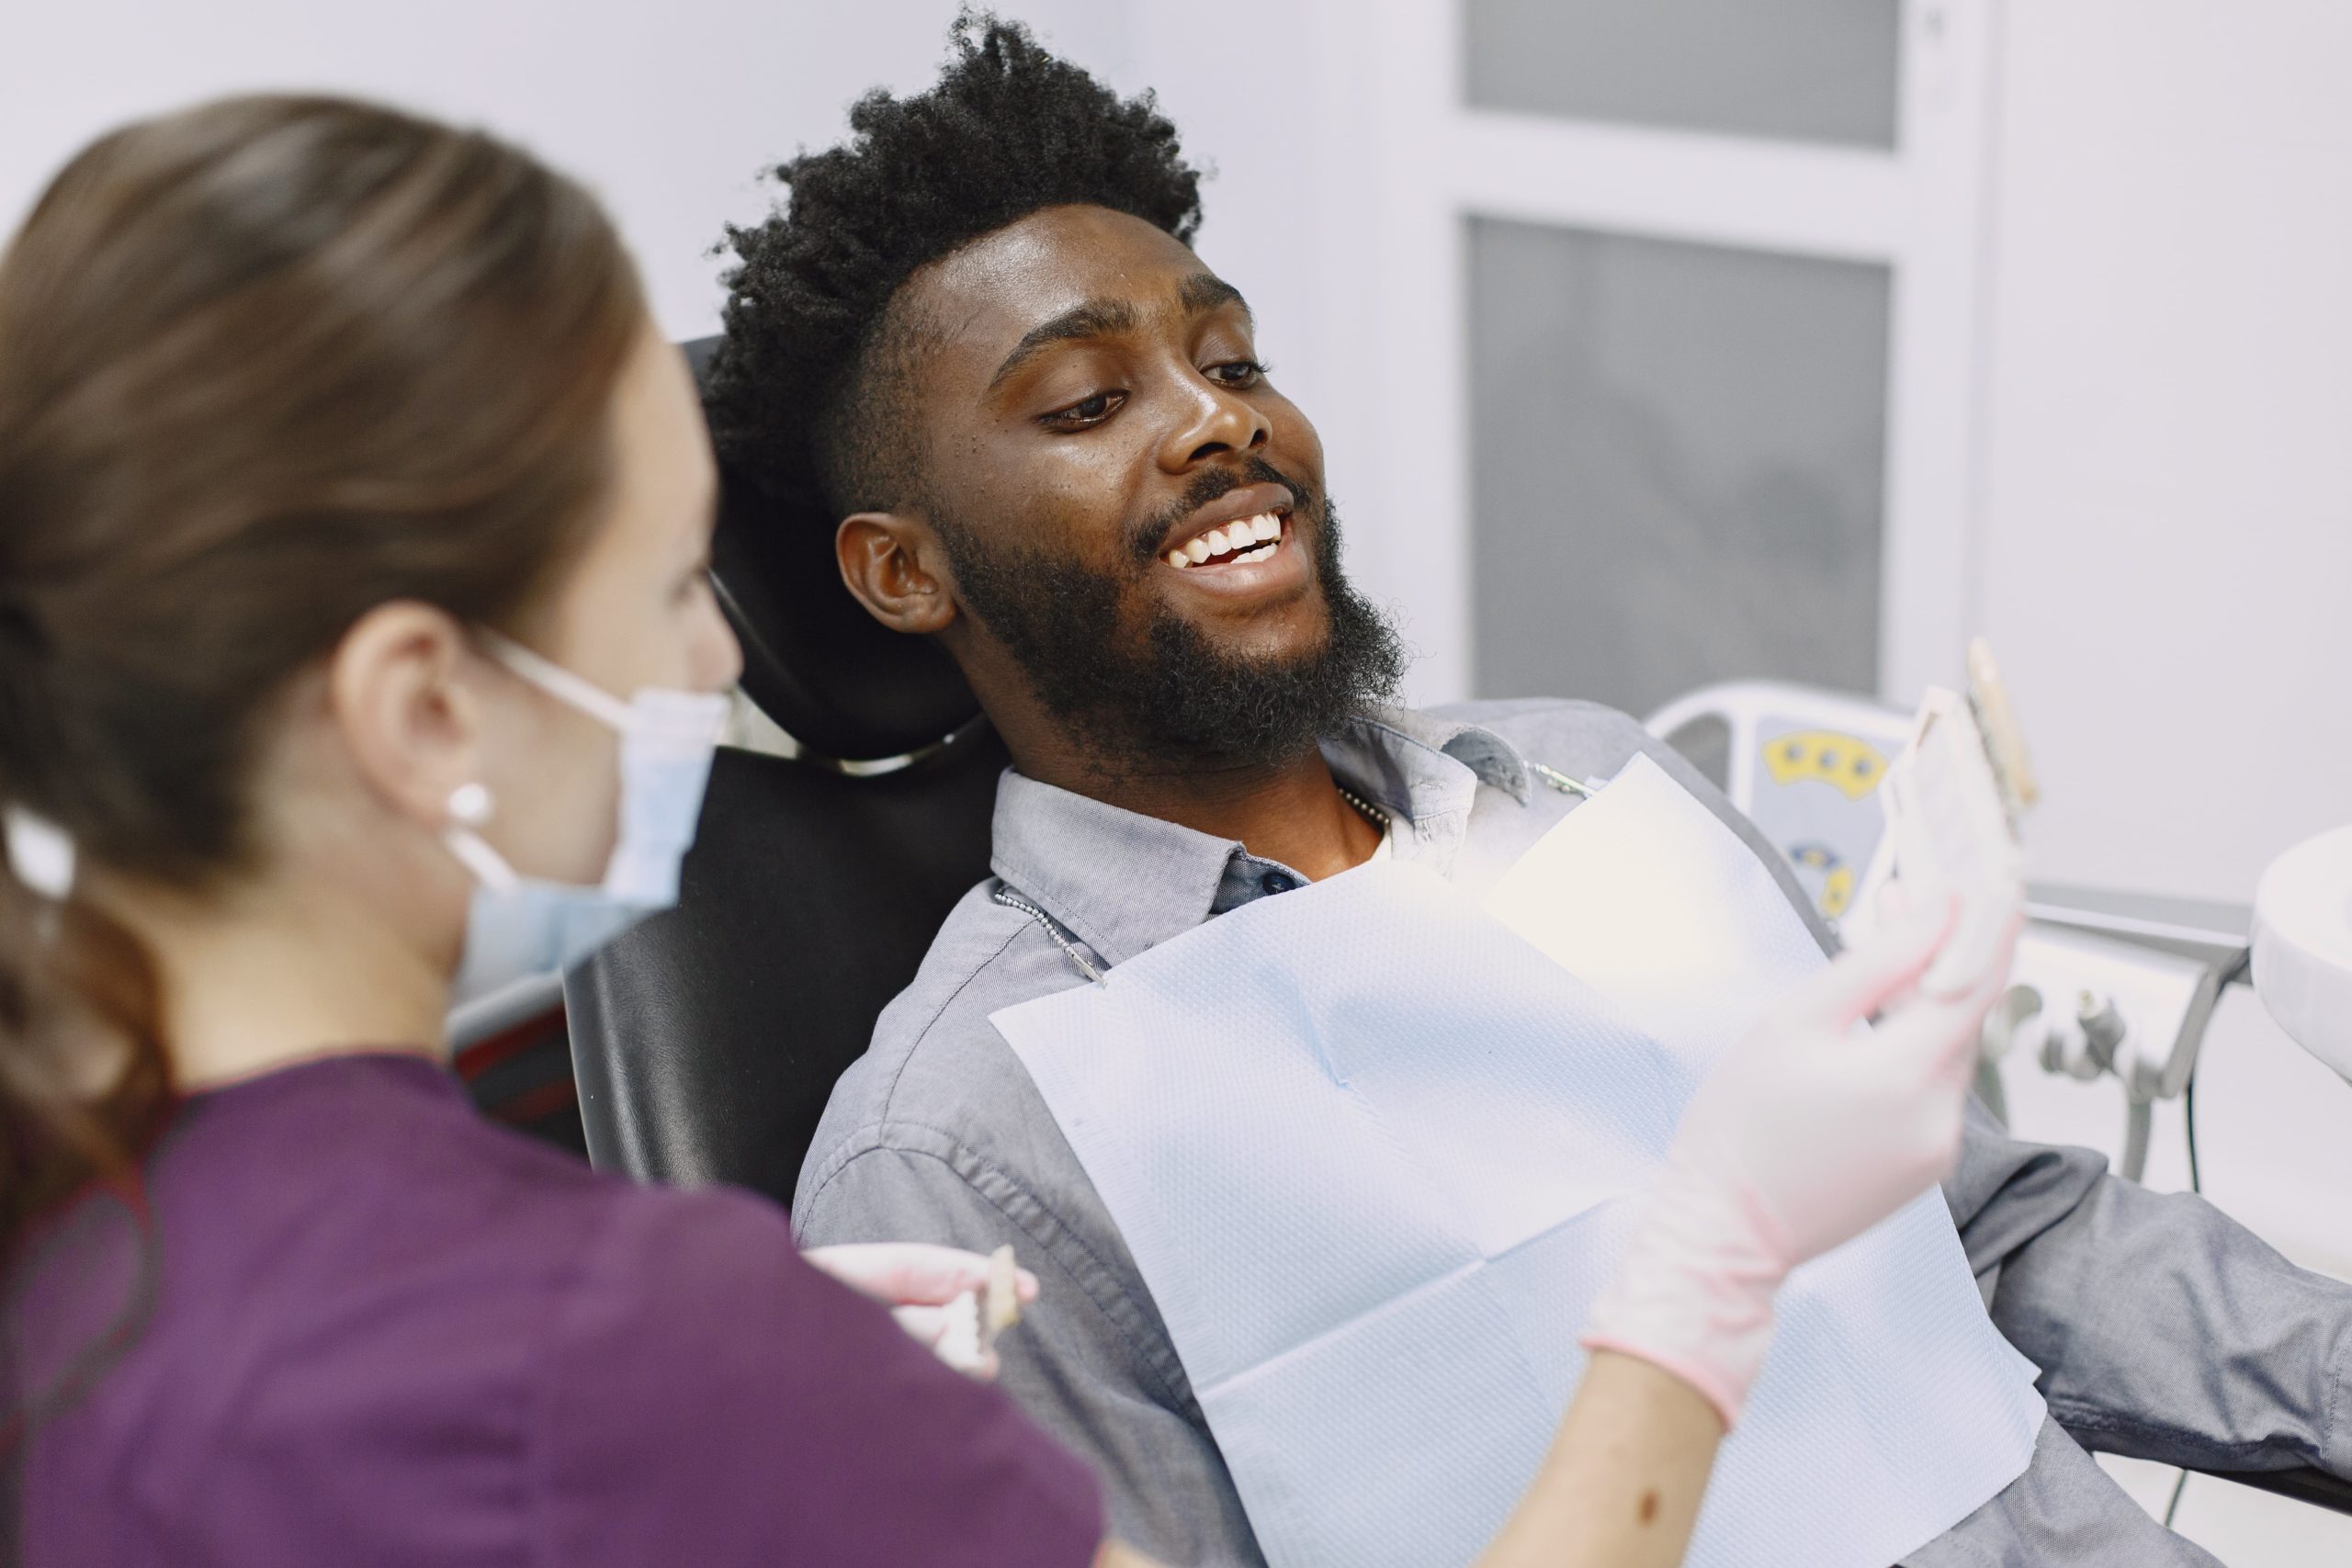 Dental Hygiene - Kensington Court Clinic - what you can expect from the appointment - man has review with dental hygienist